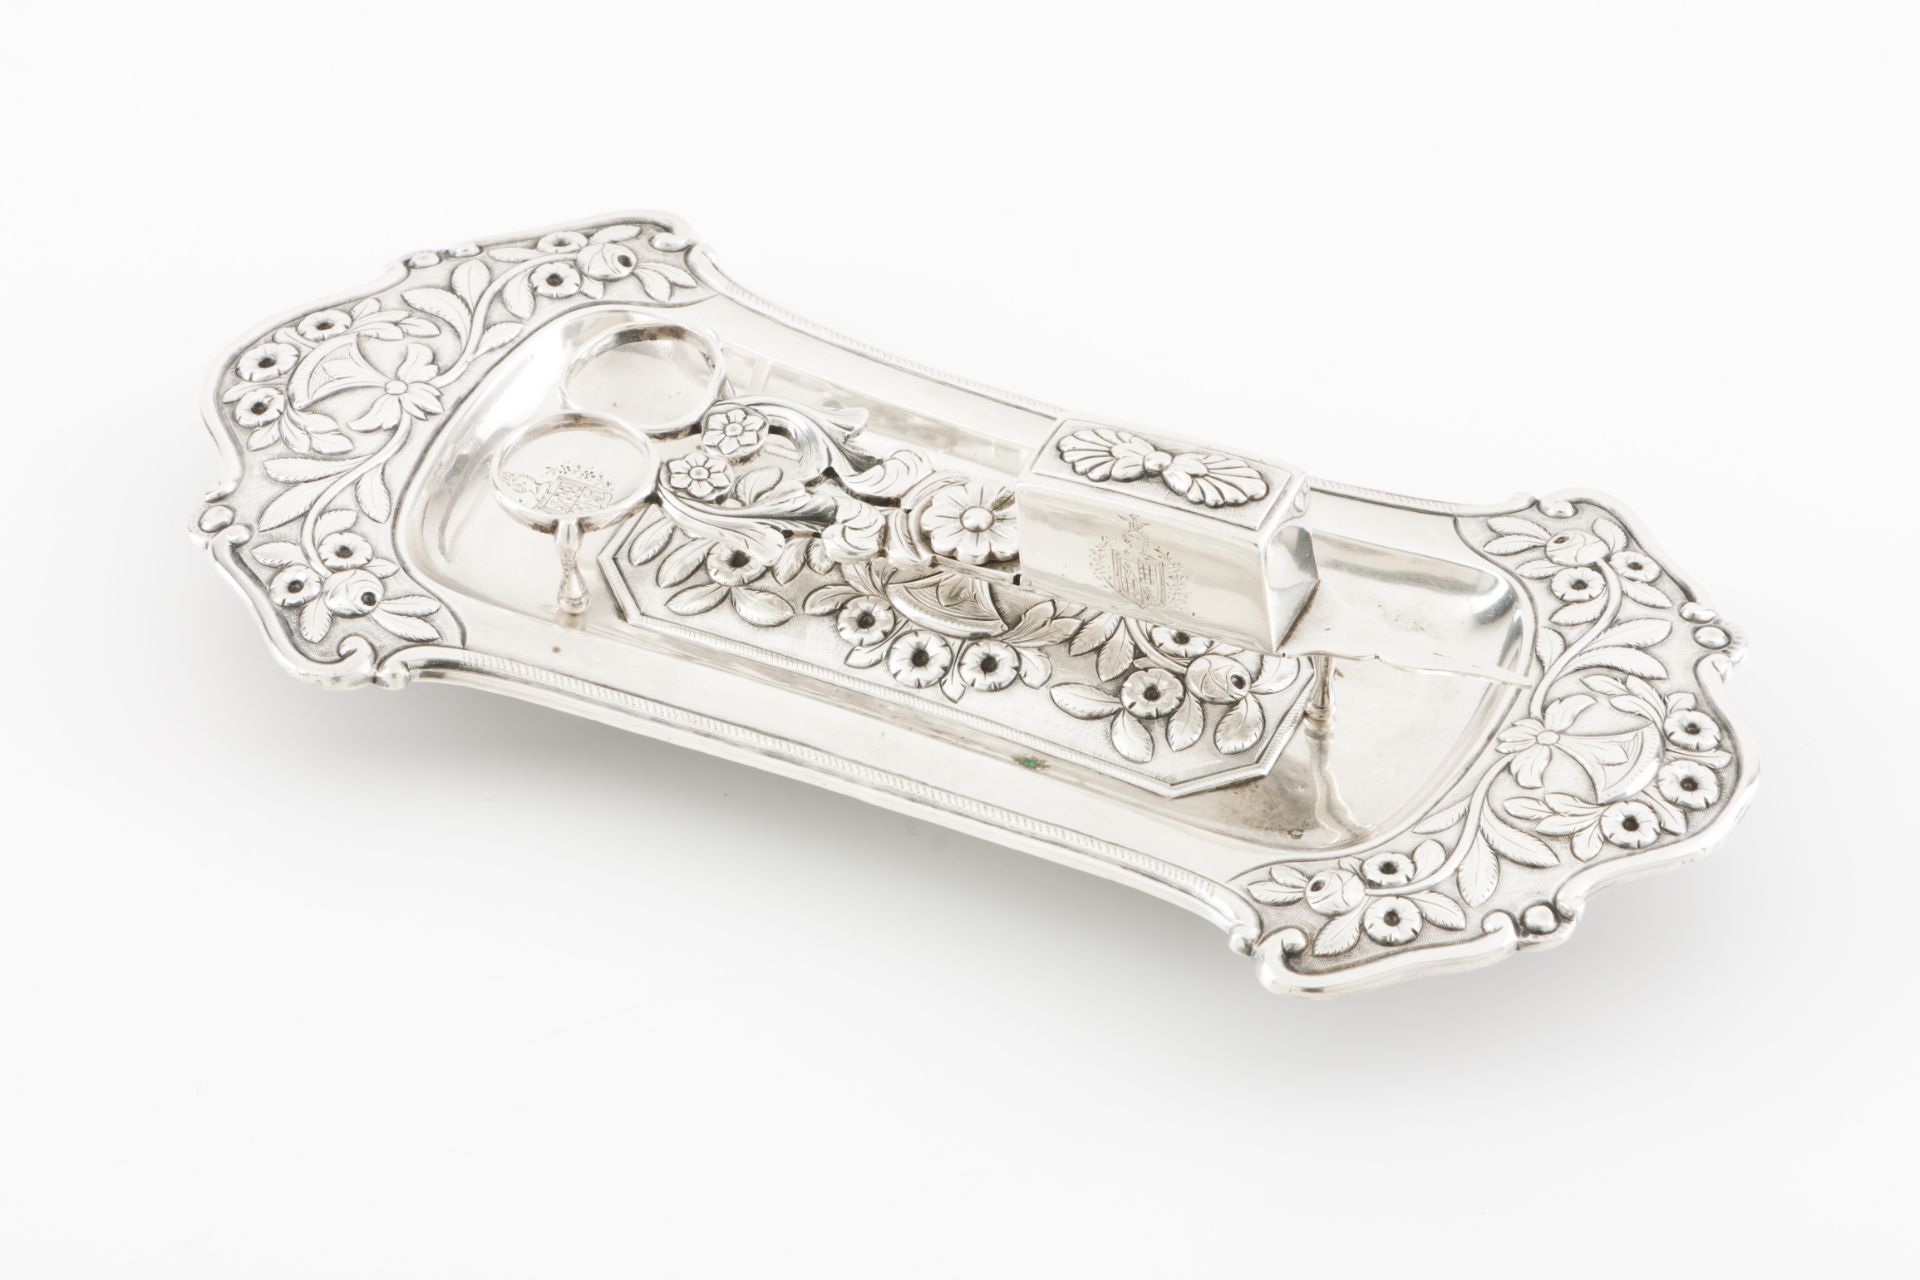 A candle snuffer scissors with trayPortuguese silver, 19th centuryRaised decoration of foliage